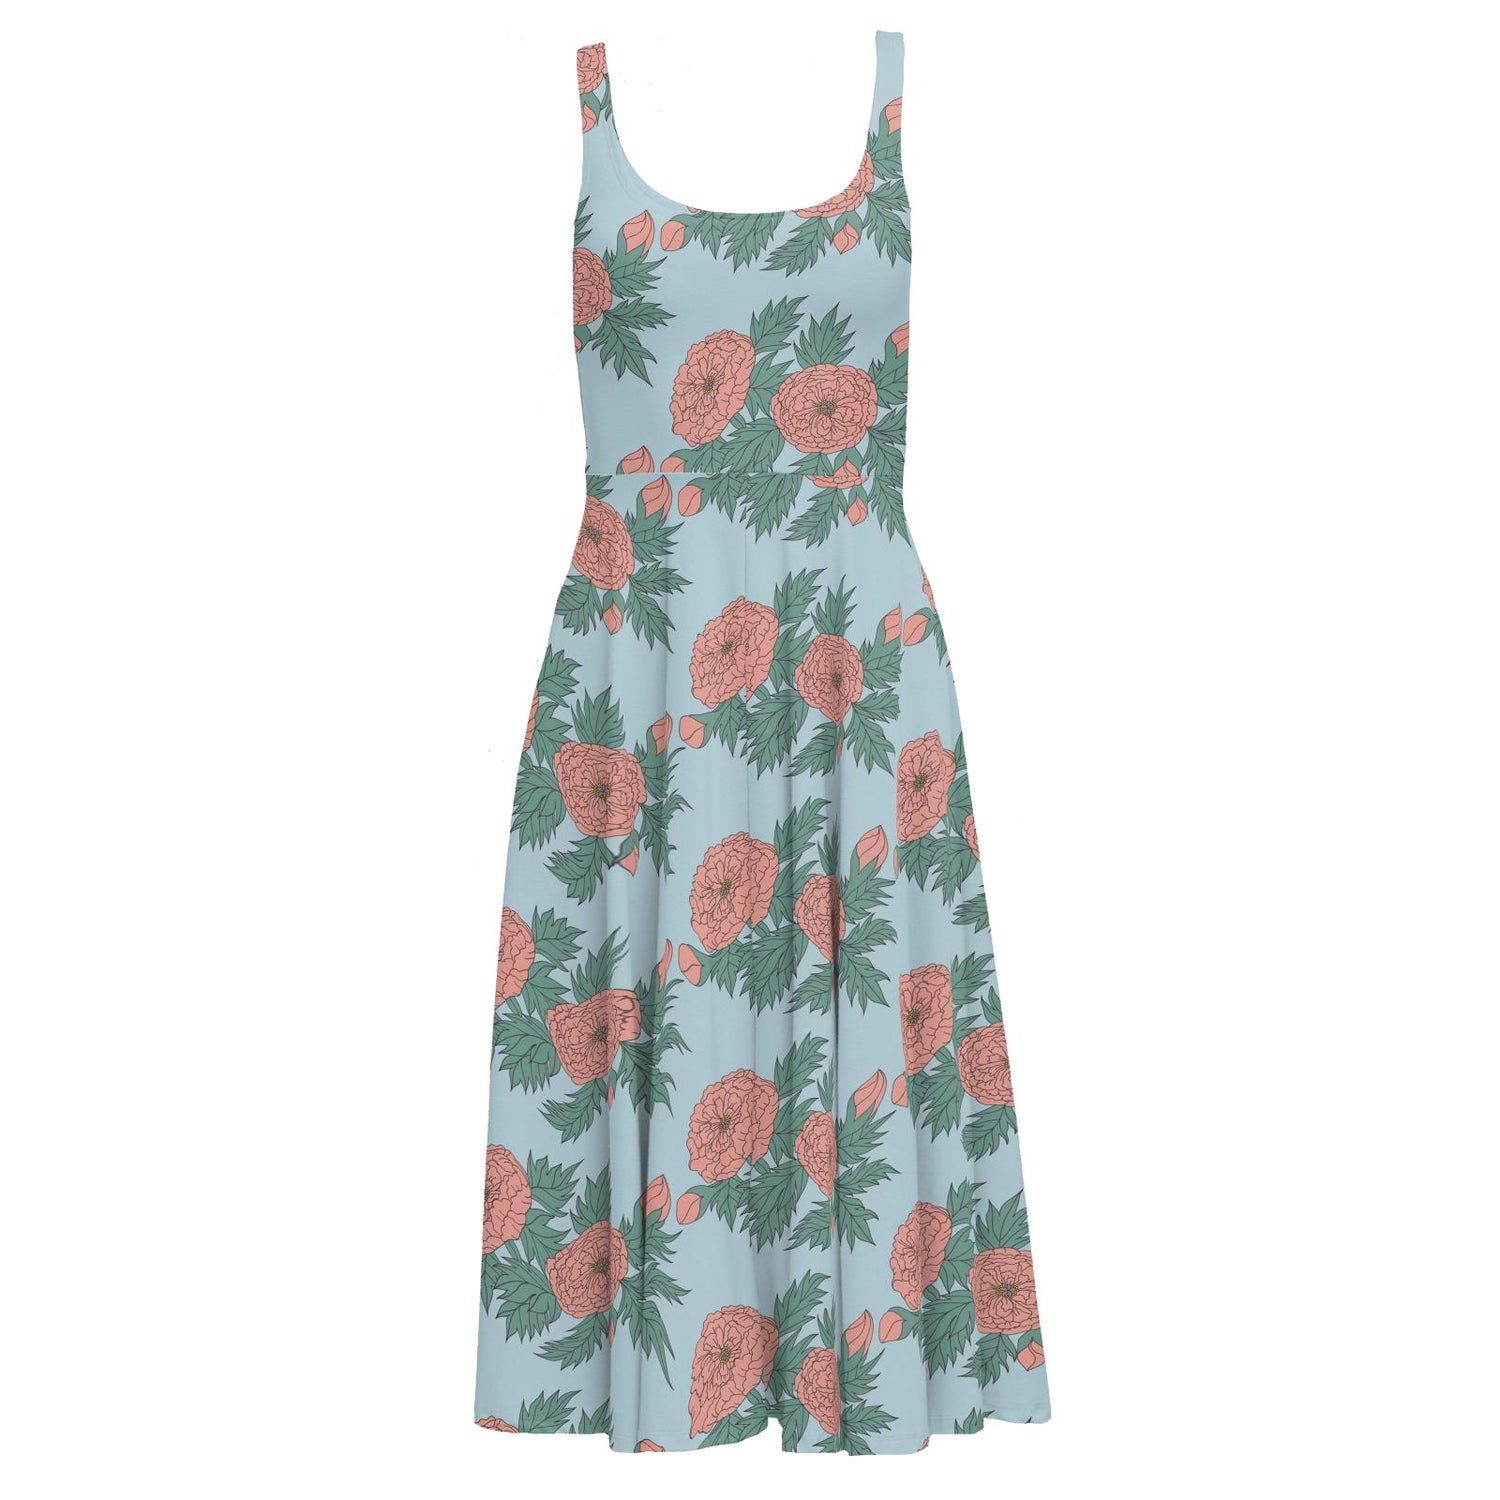 Women's Print Boardwalk Dress with Luxe Top in Spring Sky Floral